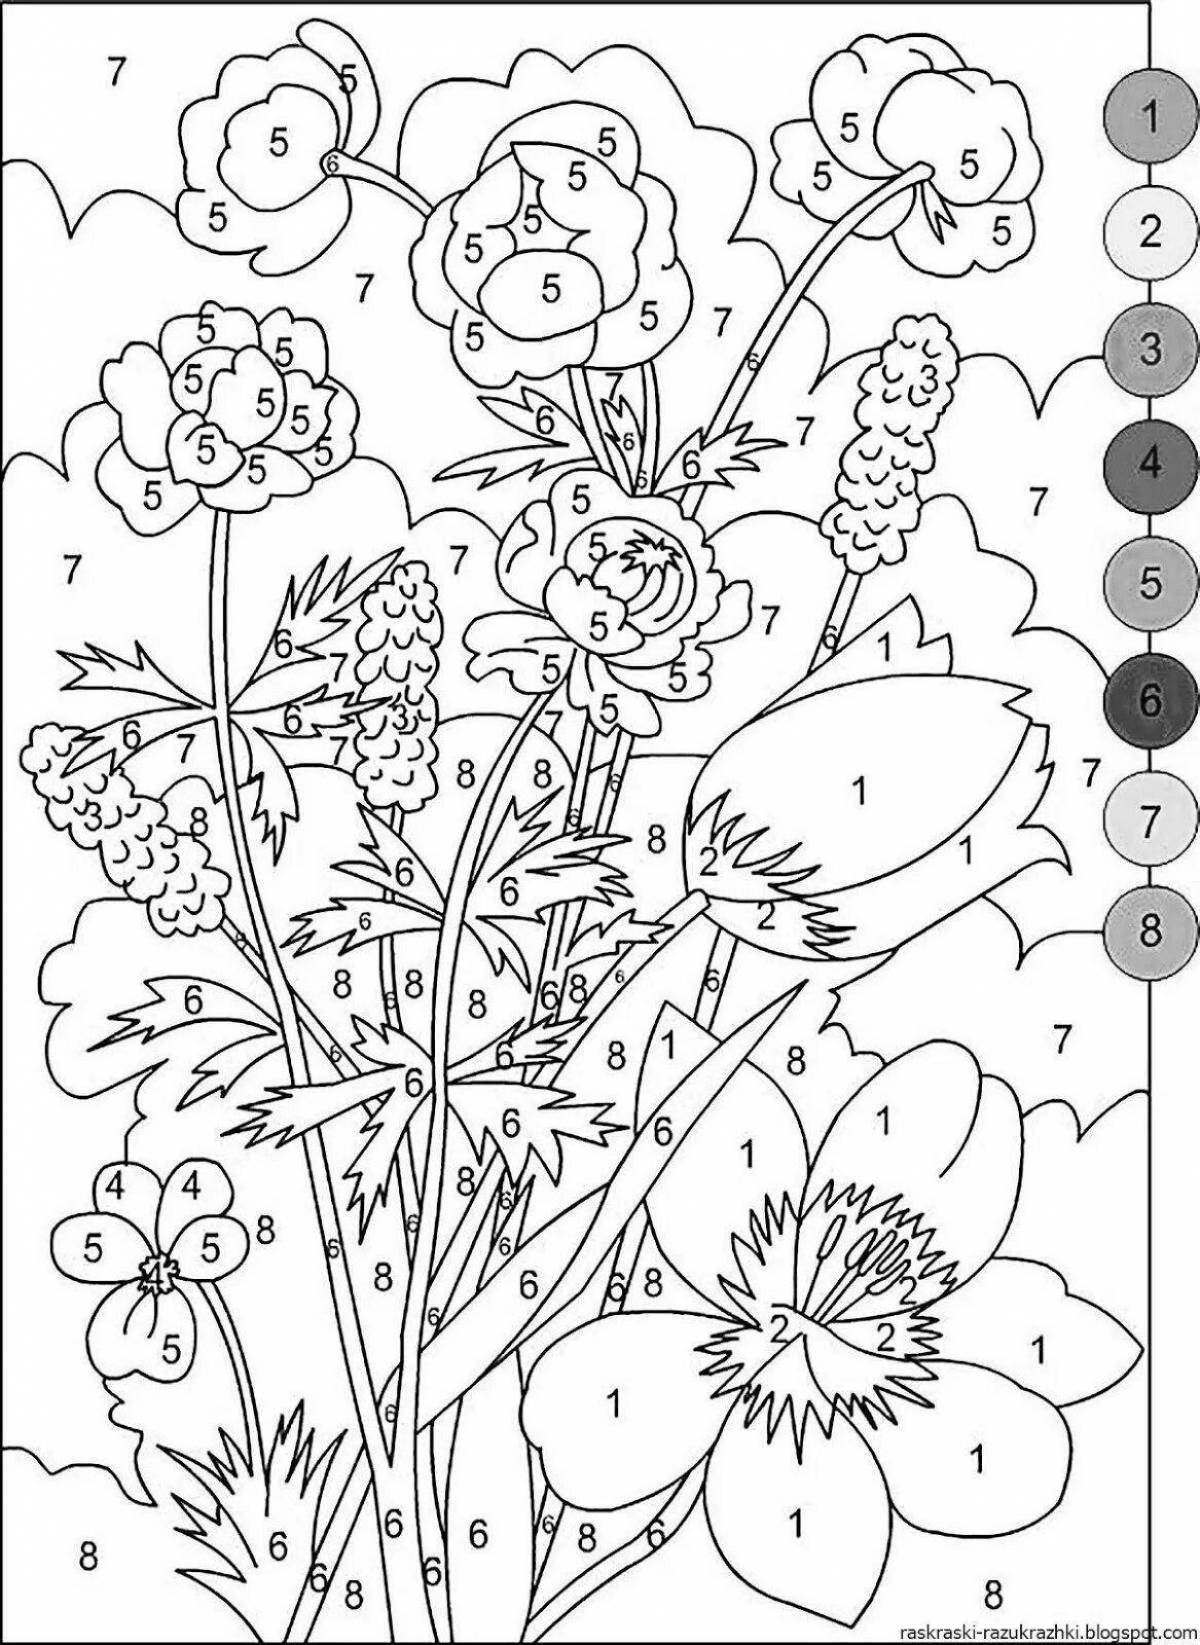 Coloring page of numbers with color splashes